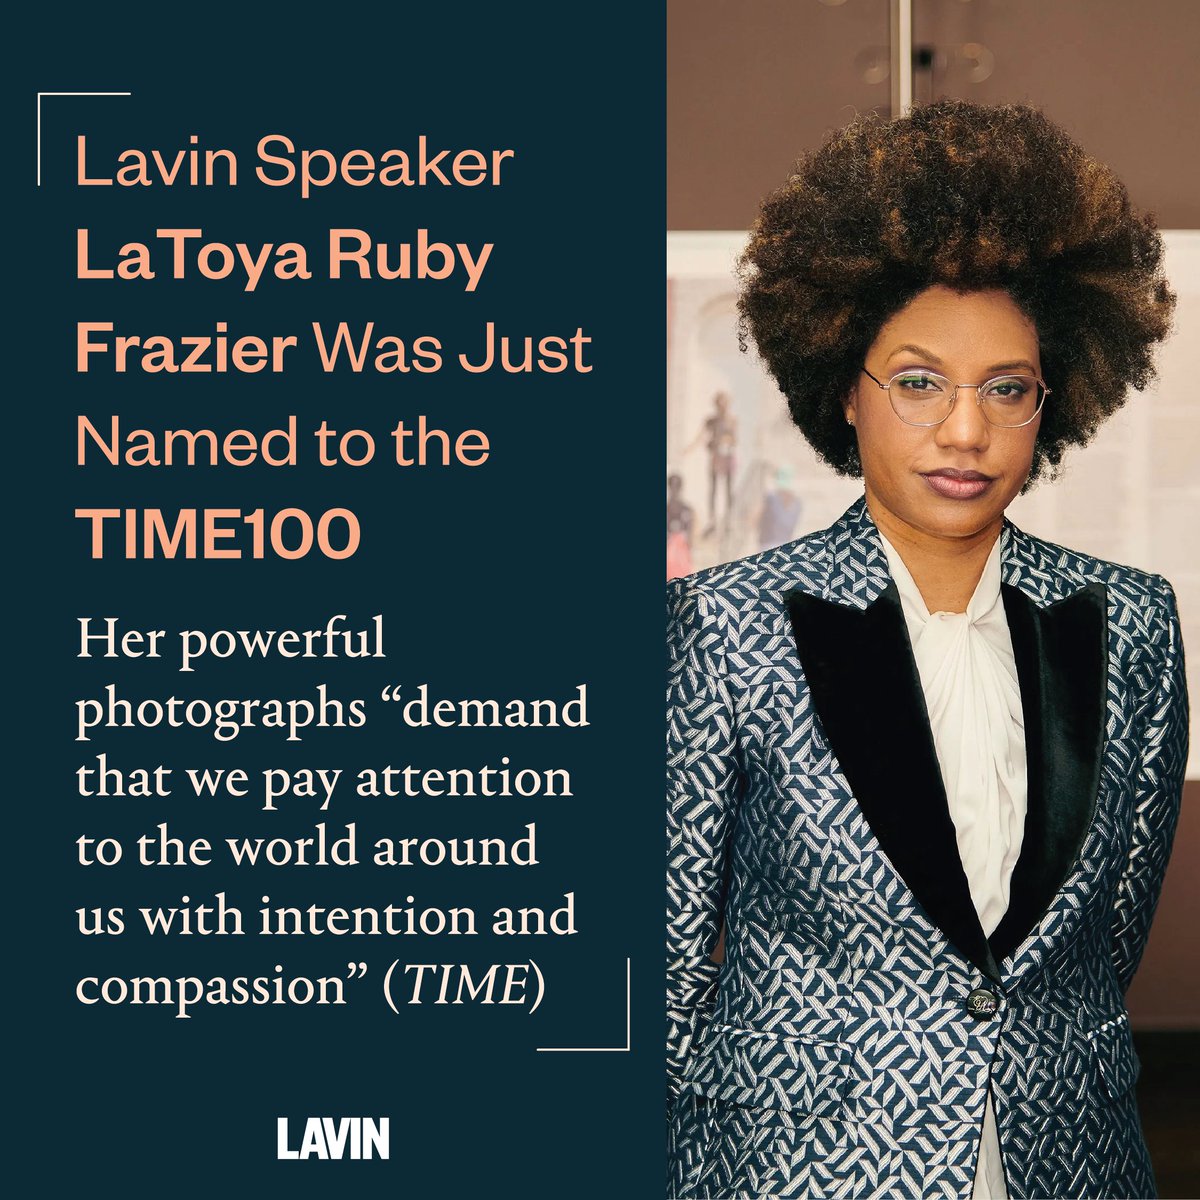 TIME just named Lavin speaker LaToya Ruby Frazier to its list of the 100 most influential people in the world! Writing for TIME, Pulitzer Prize winner Lynn Nottage calls LaToya “an eloquent storyteller, making visible the landscapes and lives of working people.” 🧵